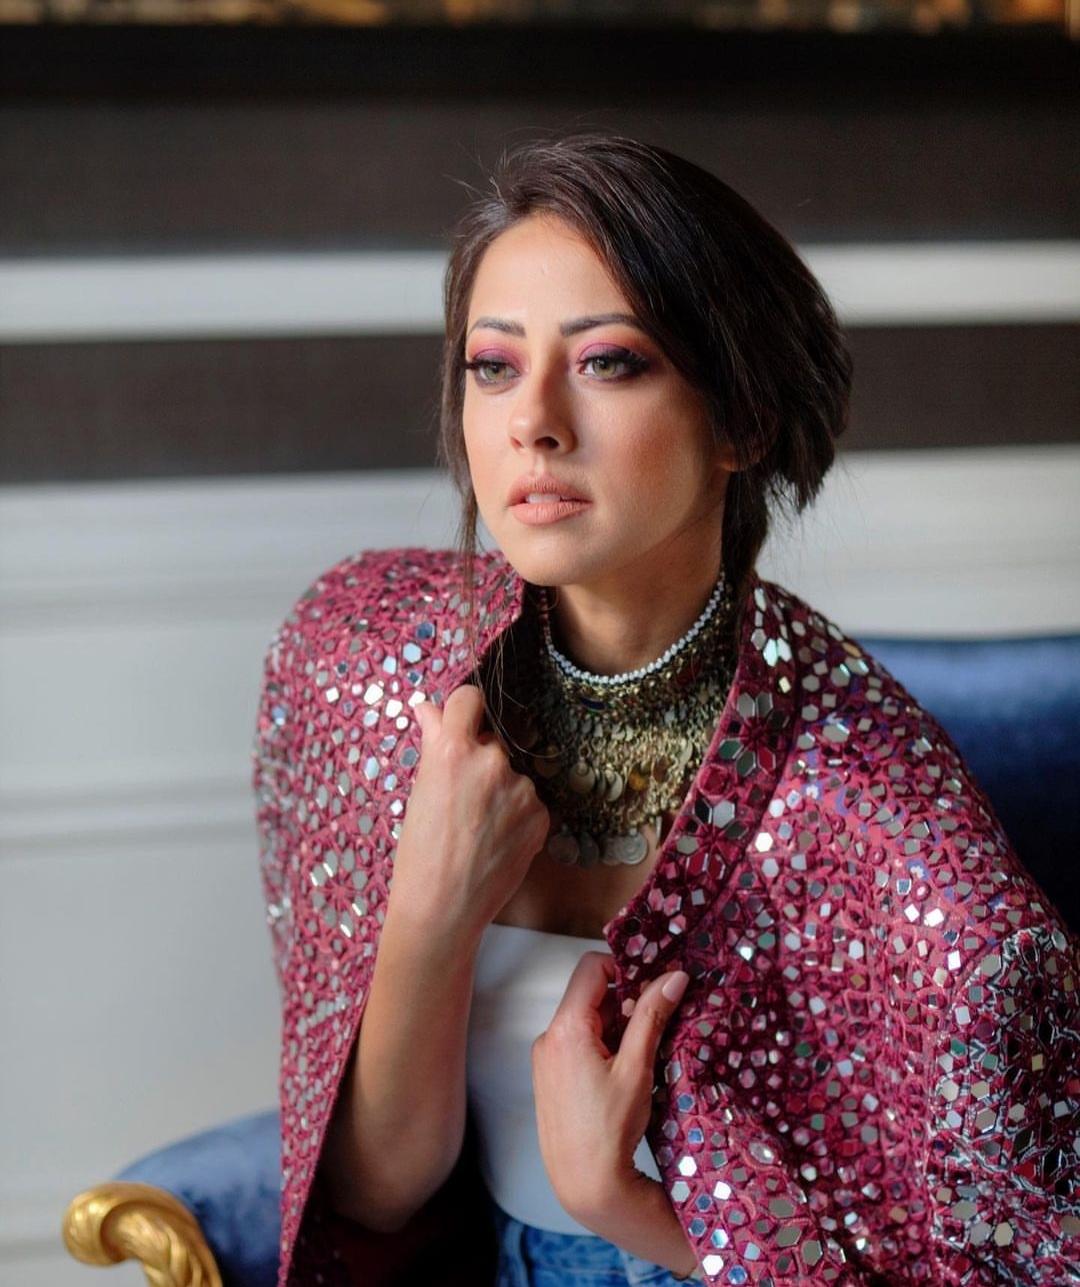 Ainy Jaffri is one of the most Beautiful Pakistani Women in the World